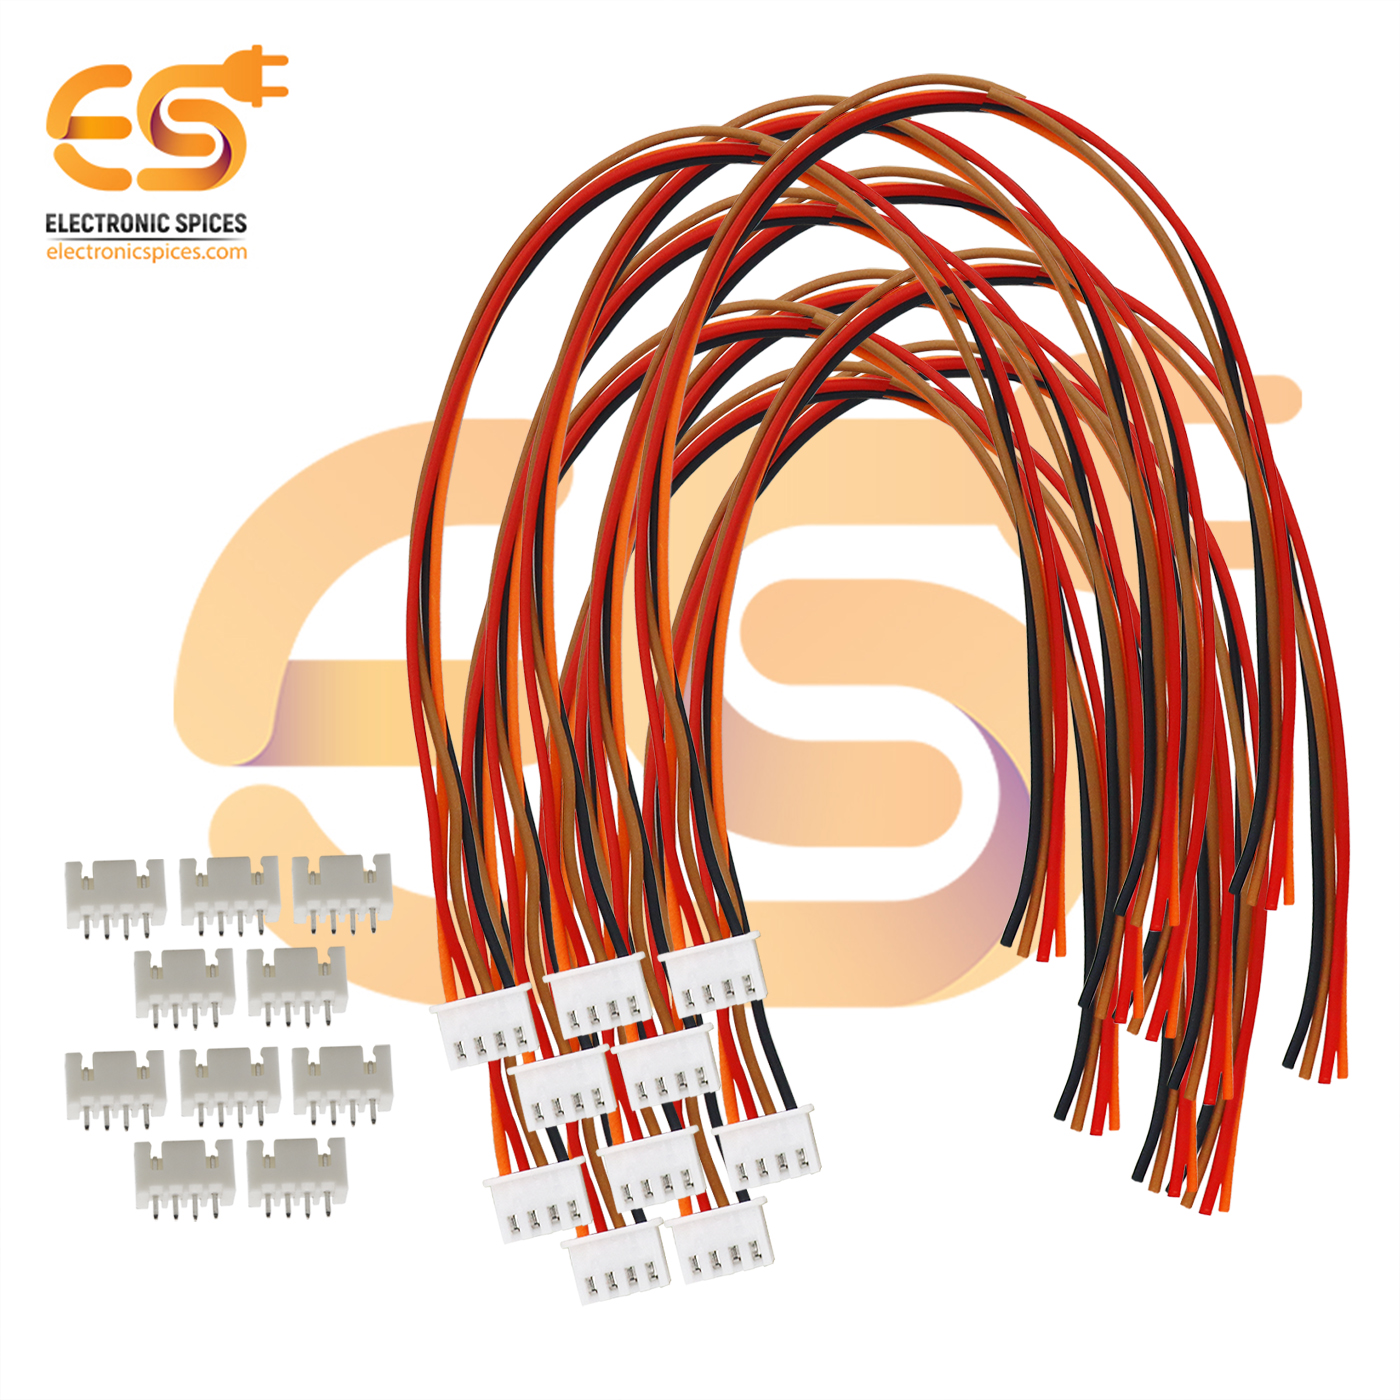 Buy 4 Pin Xh Jst Wire Connectors 25mm Pitch Male And Female Pairs 2515 Pack Of 100 Pair